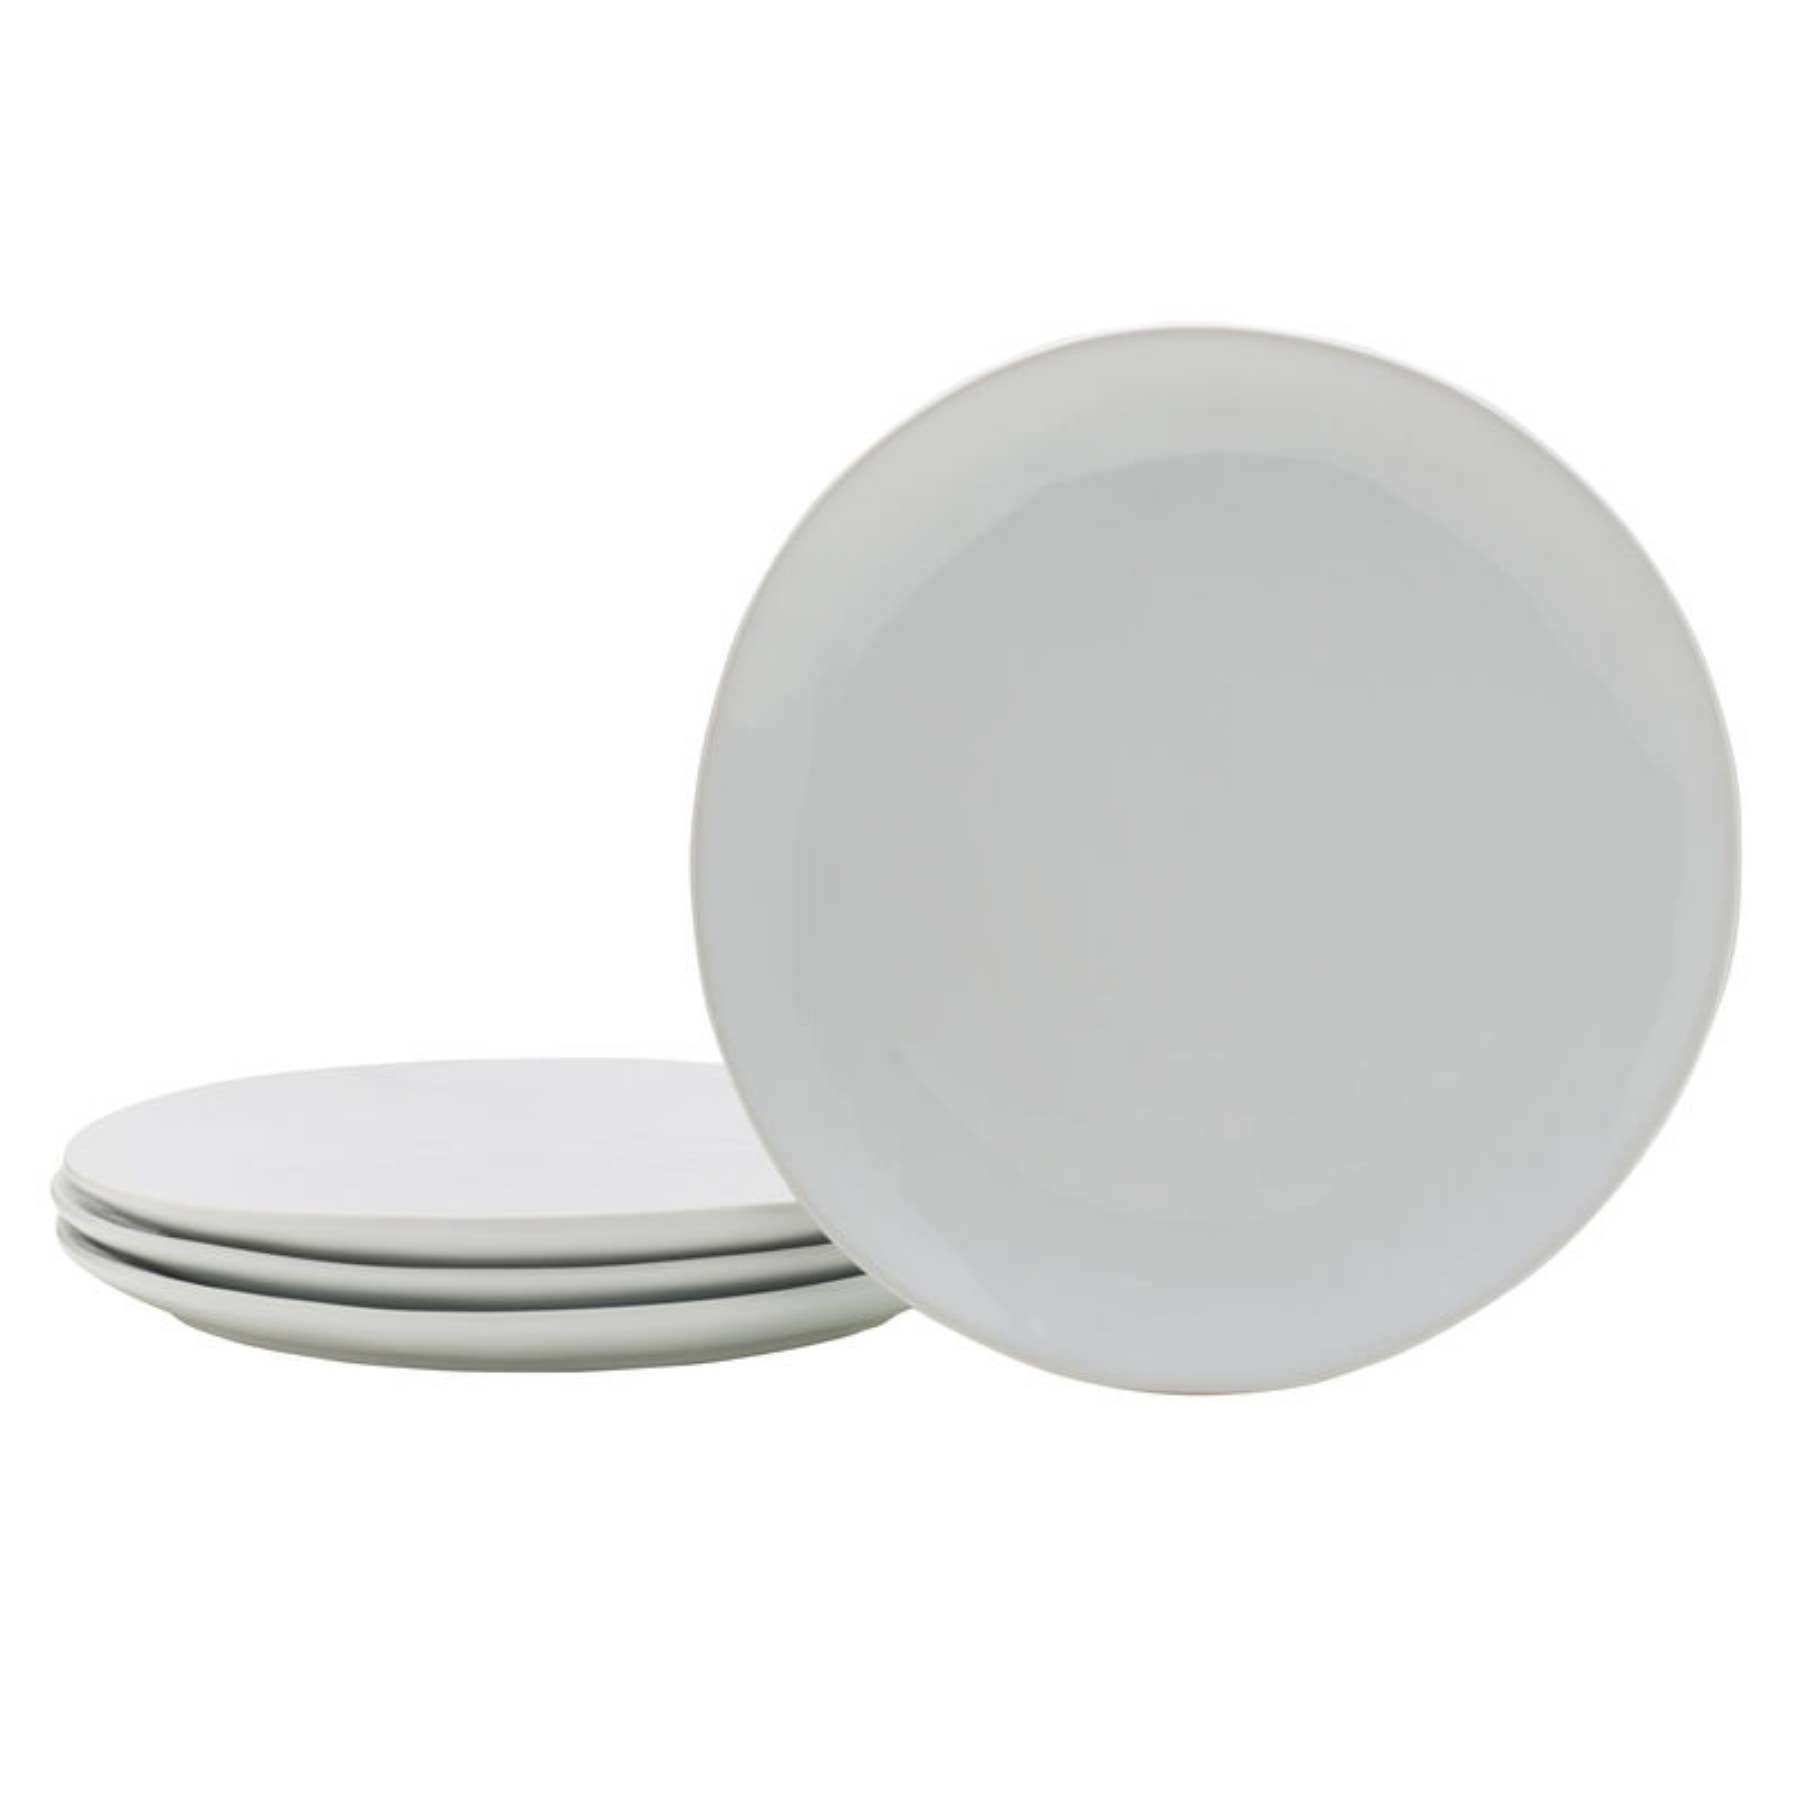 Everyday White Organic Salad Plate S4 Timothy De clue Collection